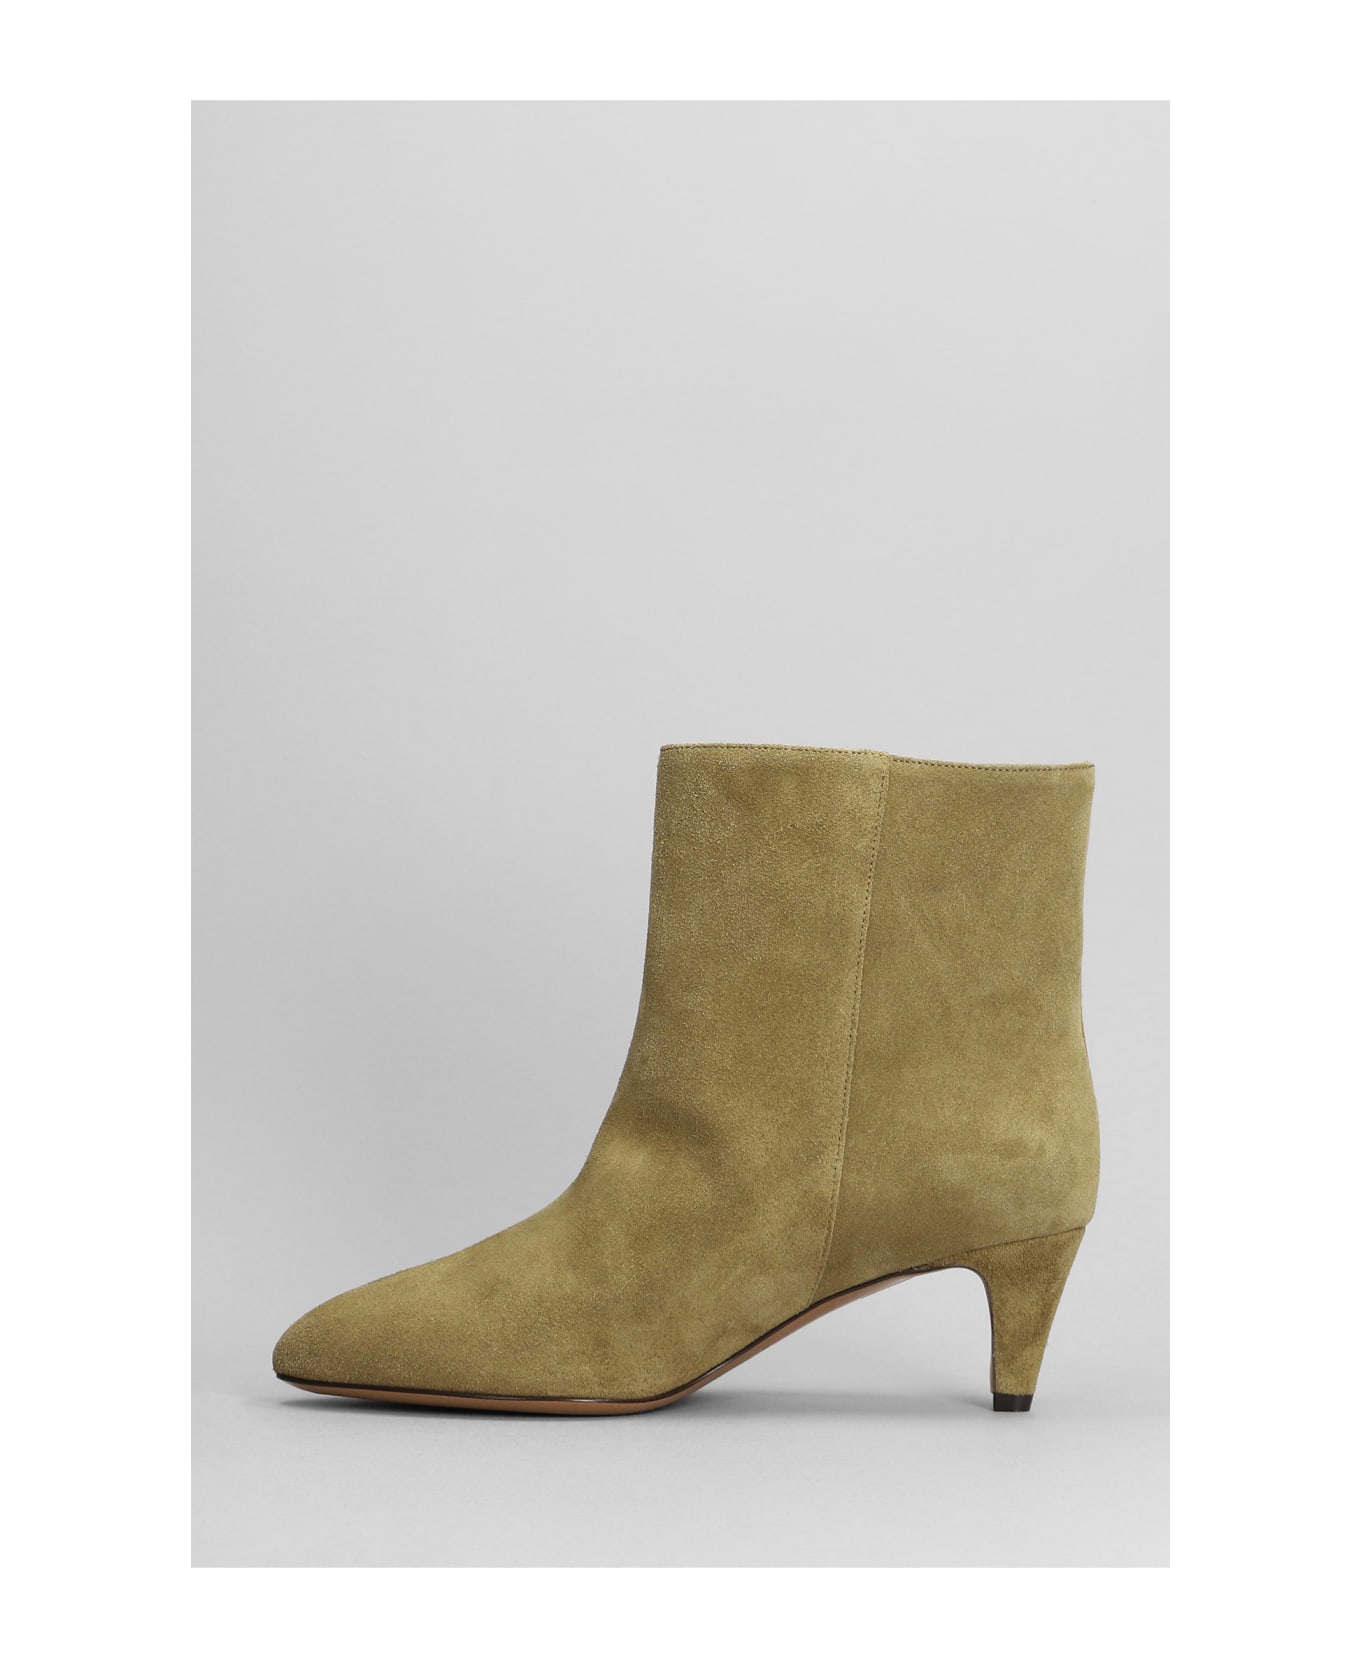 Isabel Marant Daxi Low Heels Ankle Boots In Taupe Suede - taupe ブーツ